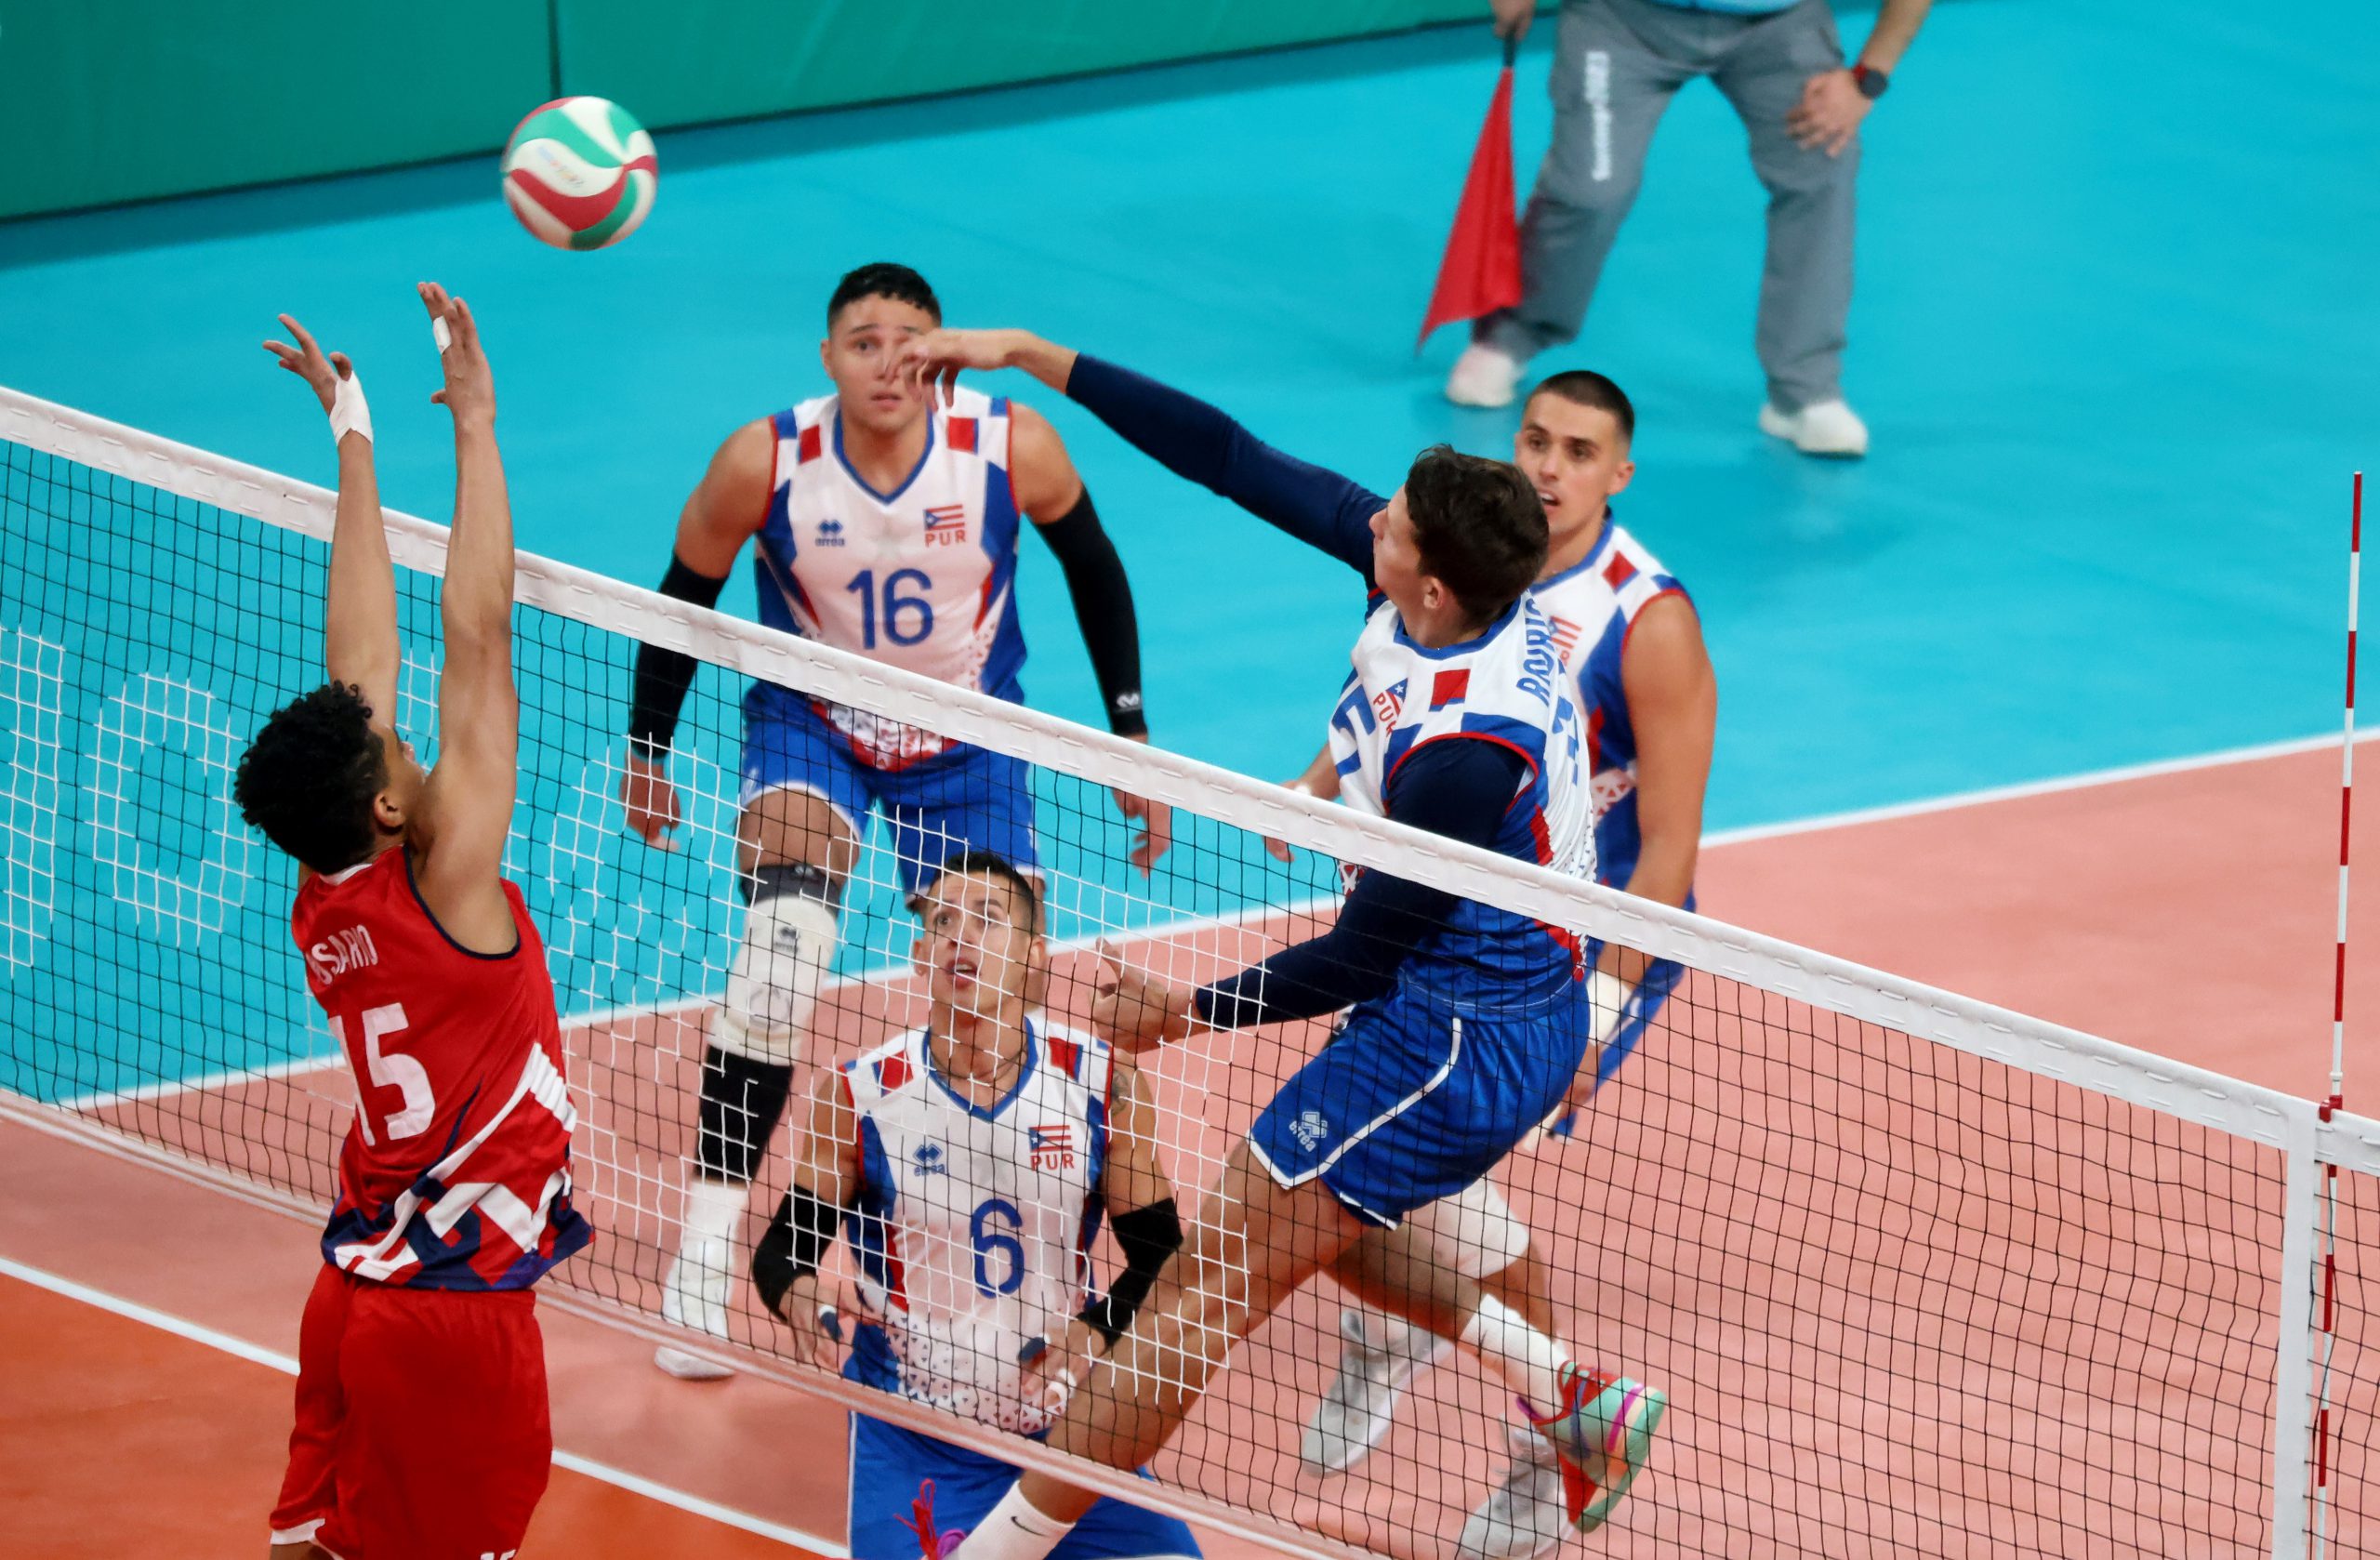 Puerto Rico’s victory against Dominican Republic puts them in Quarterfinals